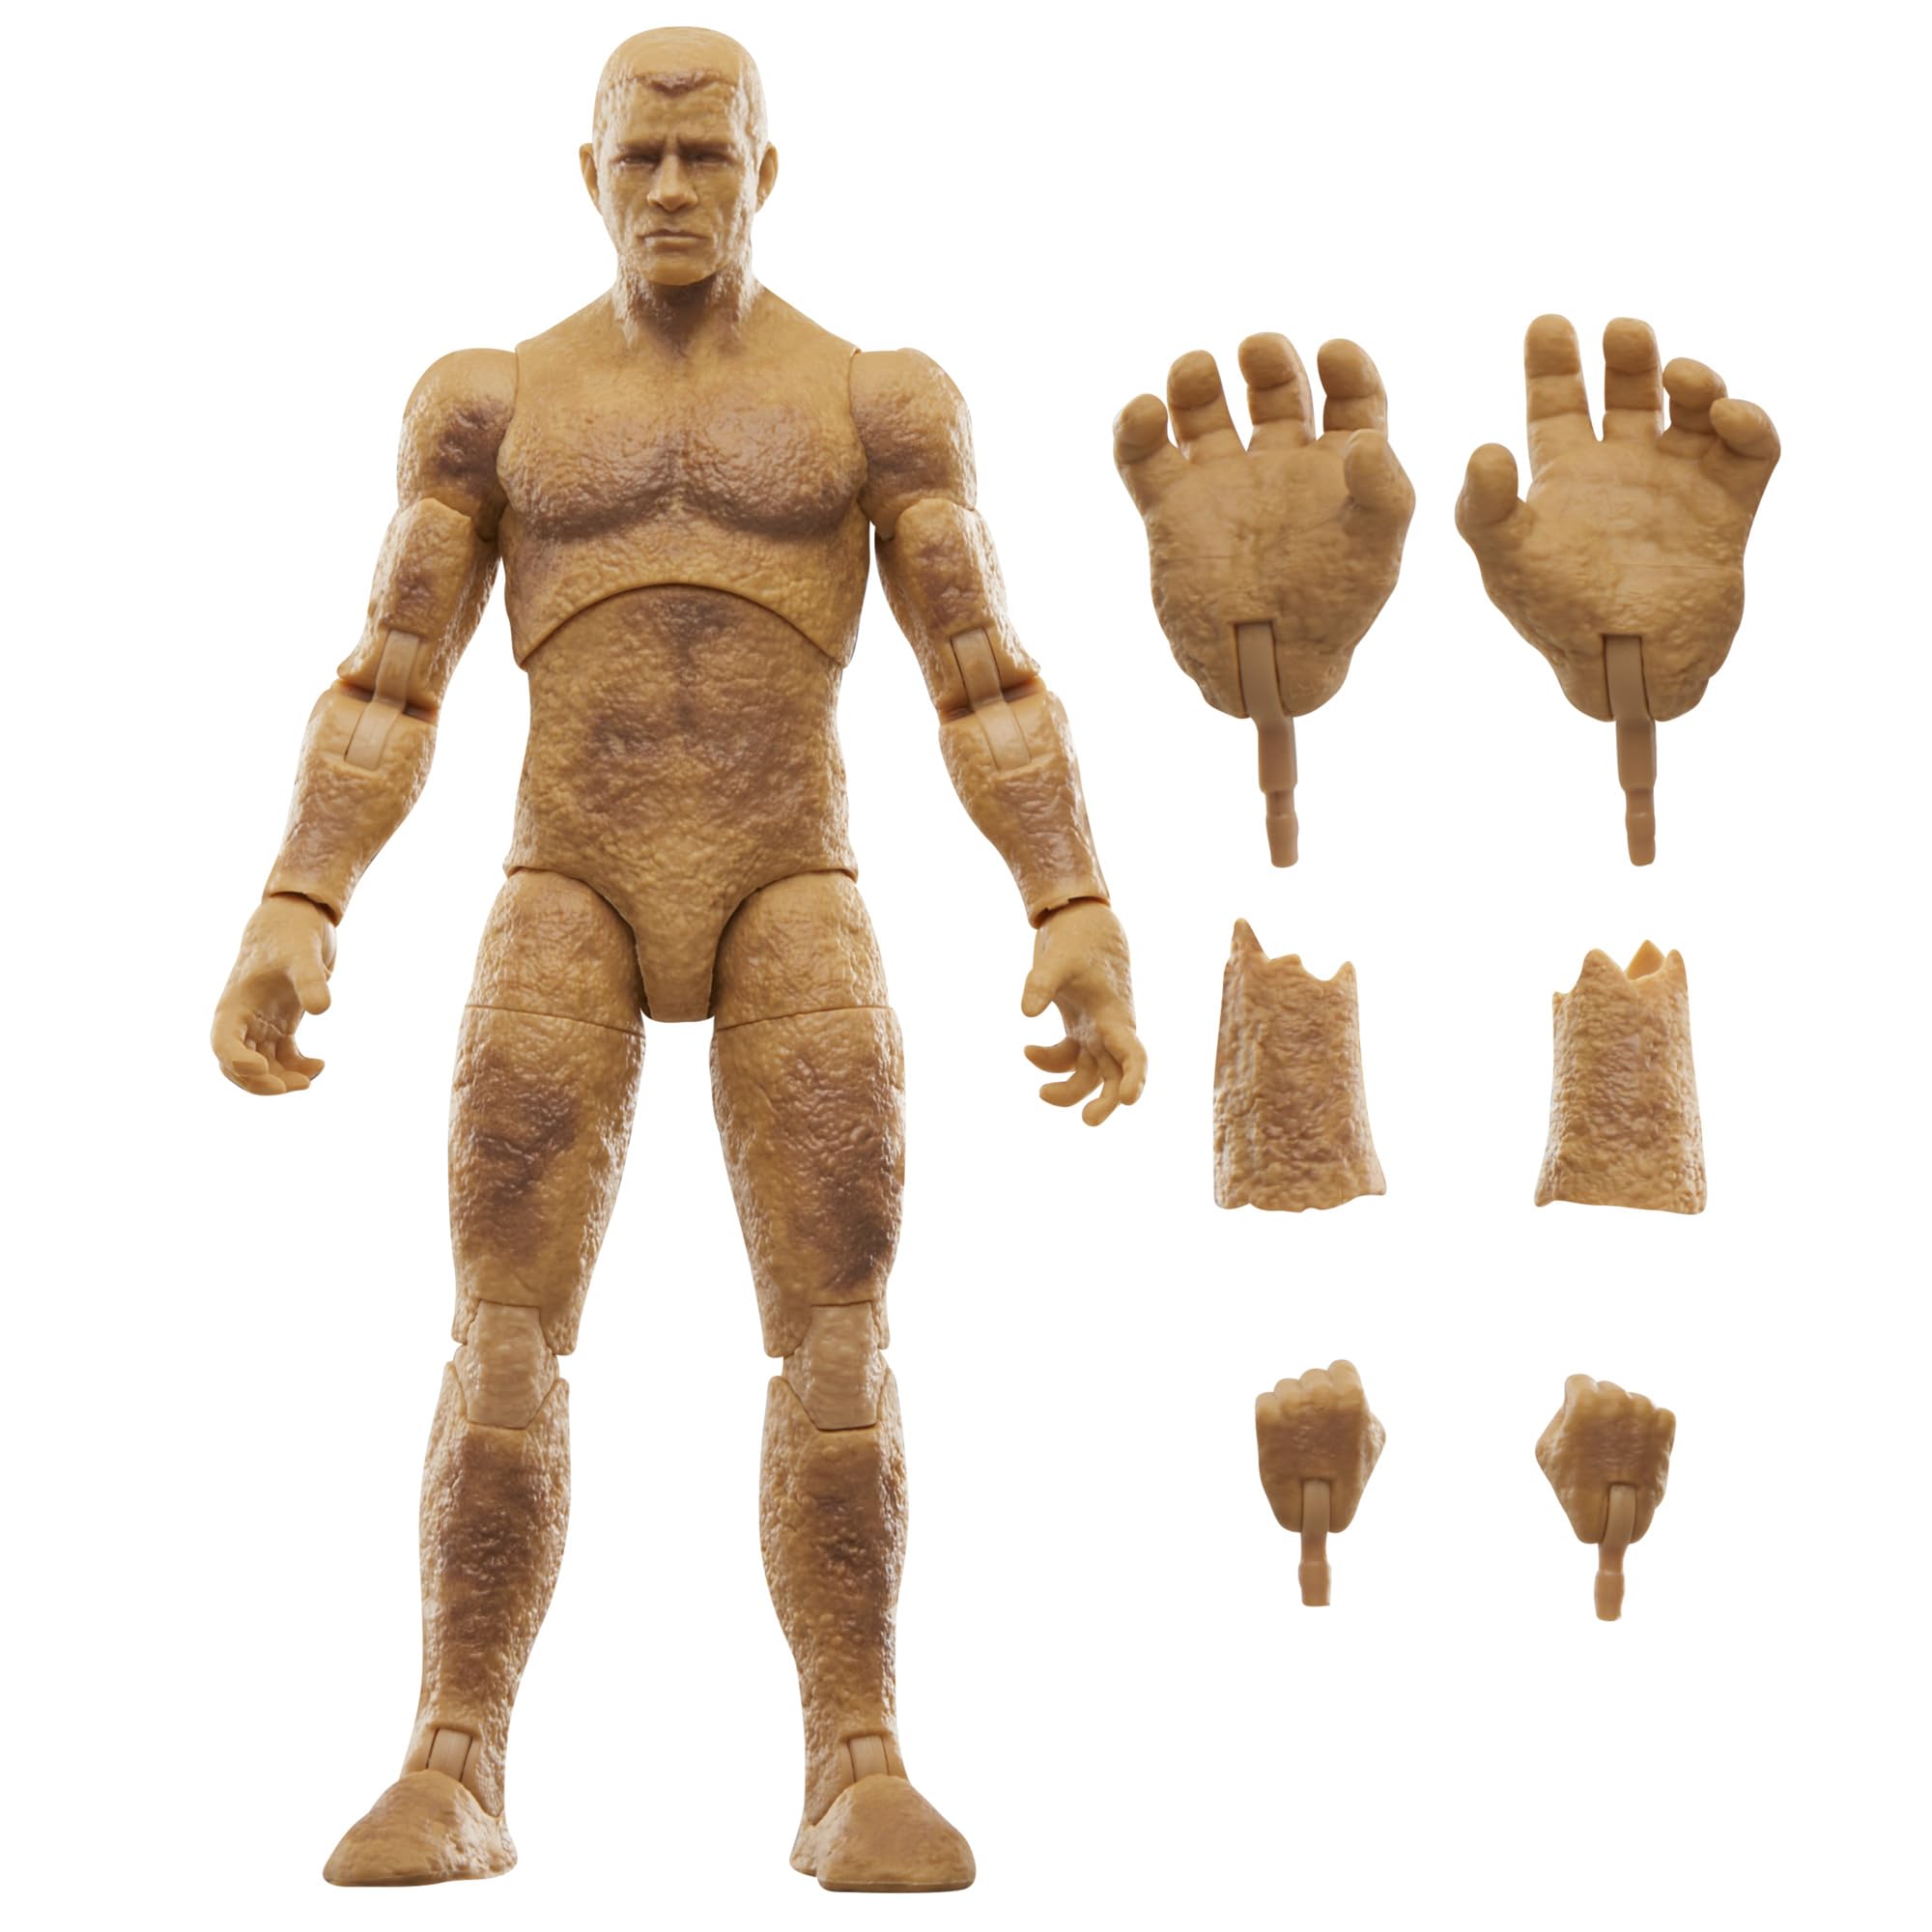 Marvel Legends Series Sandman, Spider-Man: No Way Home Collectible 6-Inch Action Figures, Ages 4 and Up